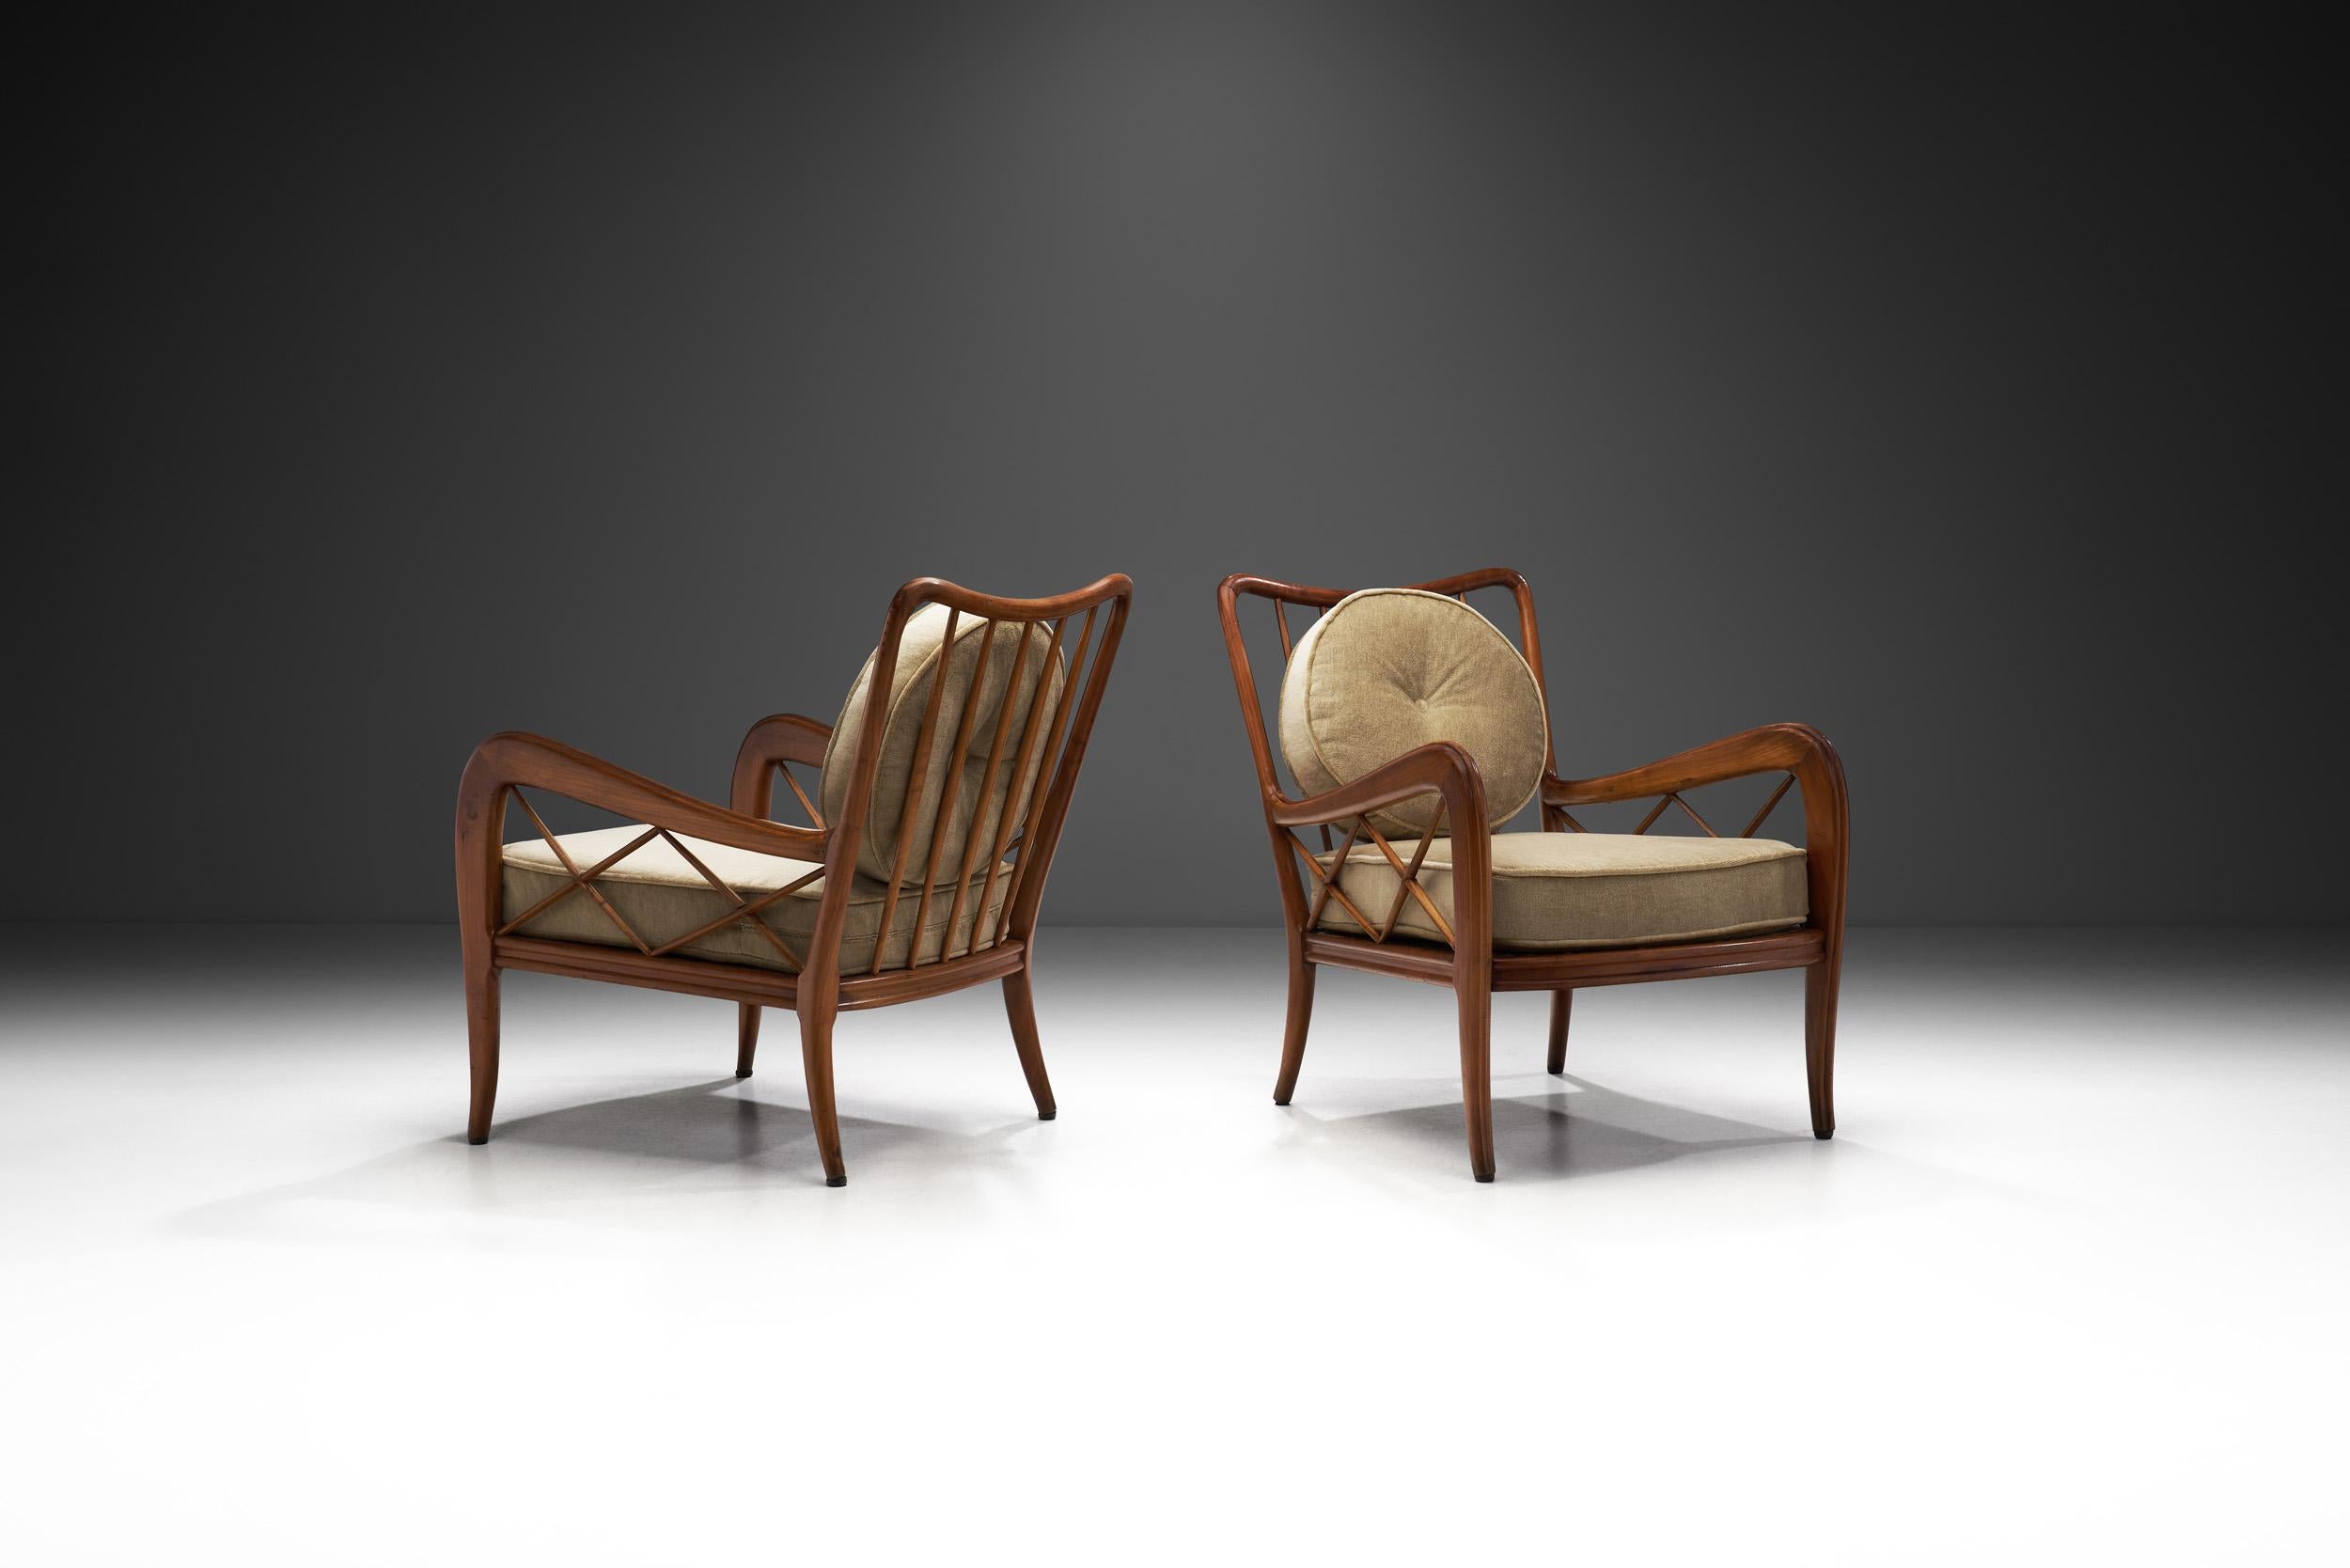 Italian Modern furniture is defined by unique design, perfect execution, and exclusivity. This pair of lounge chairs attributed to Italian design icon Paolo Buffa, are a true testament to the glory days of mid-century modernism in Italy. His design